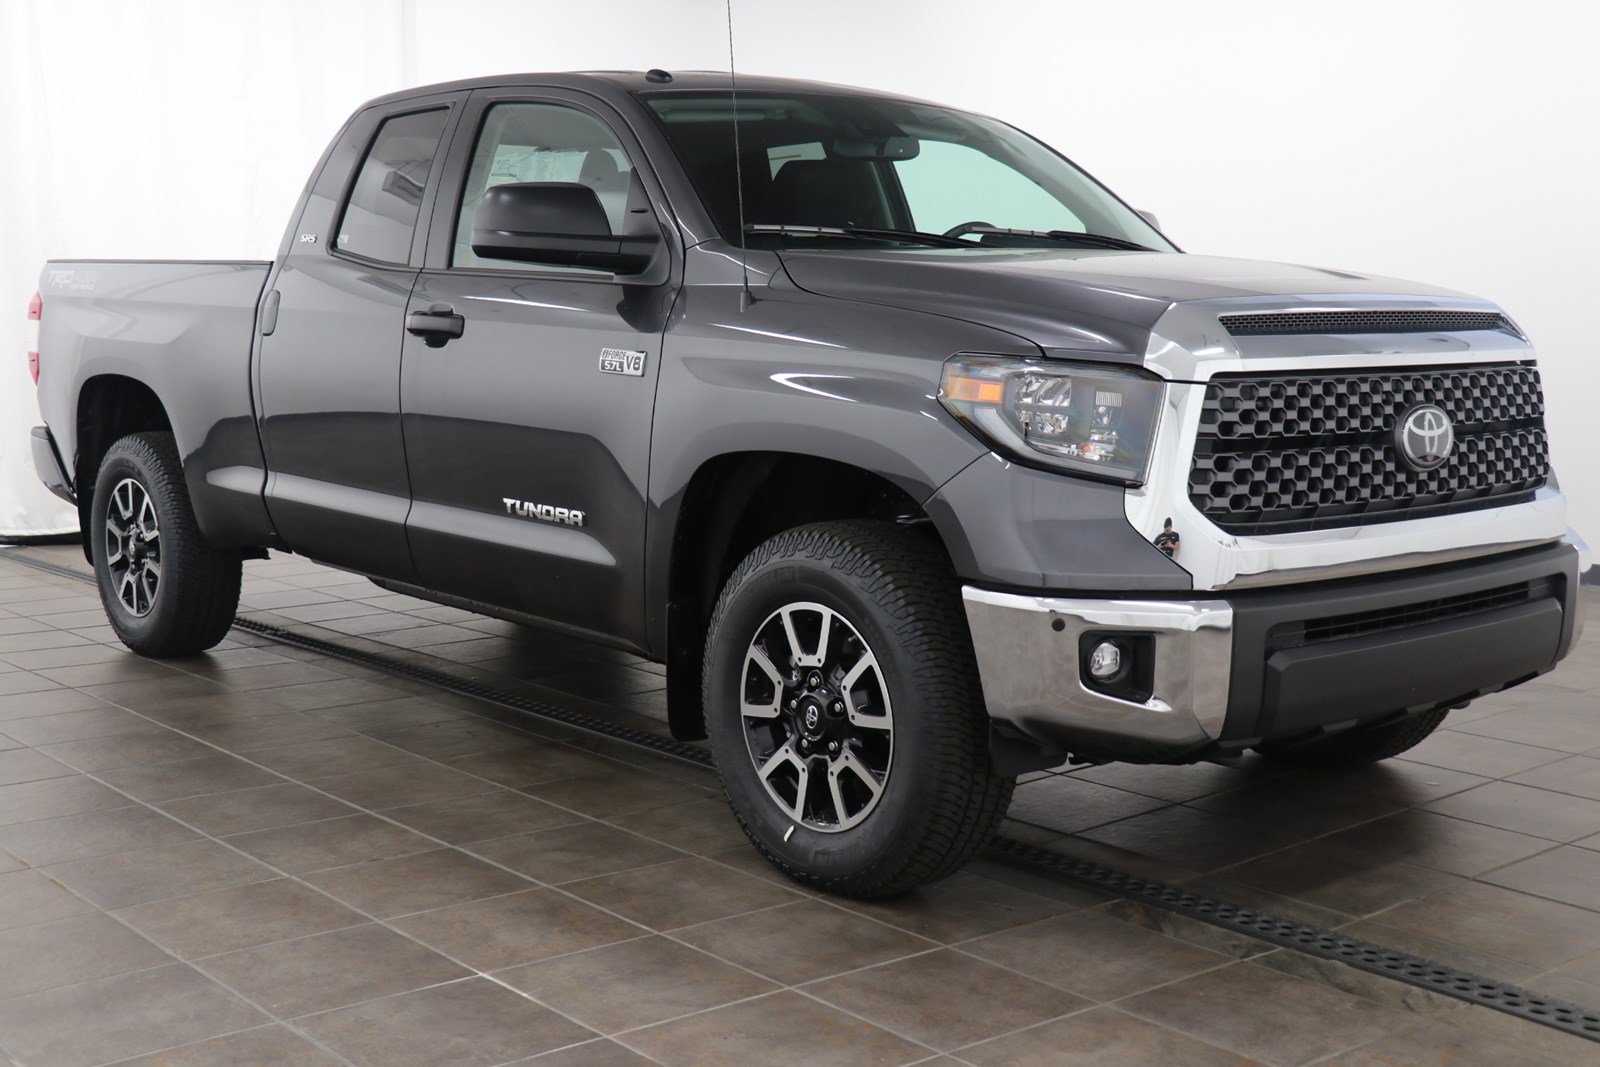 New 2019 Toyota Tundra 4WD SR5 Double Cab Double Cab in Elmhurst #